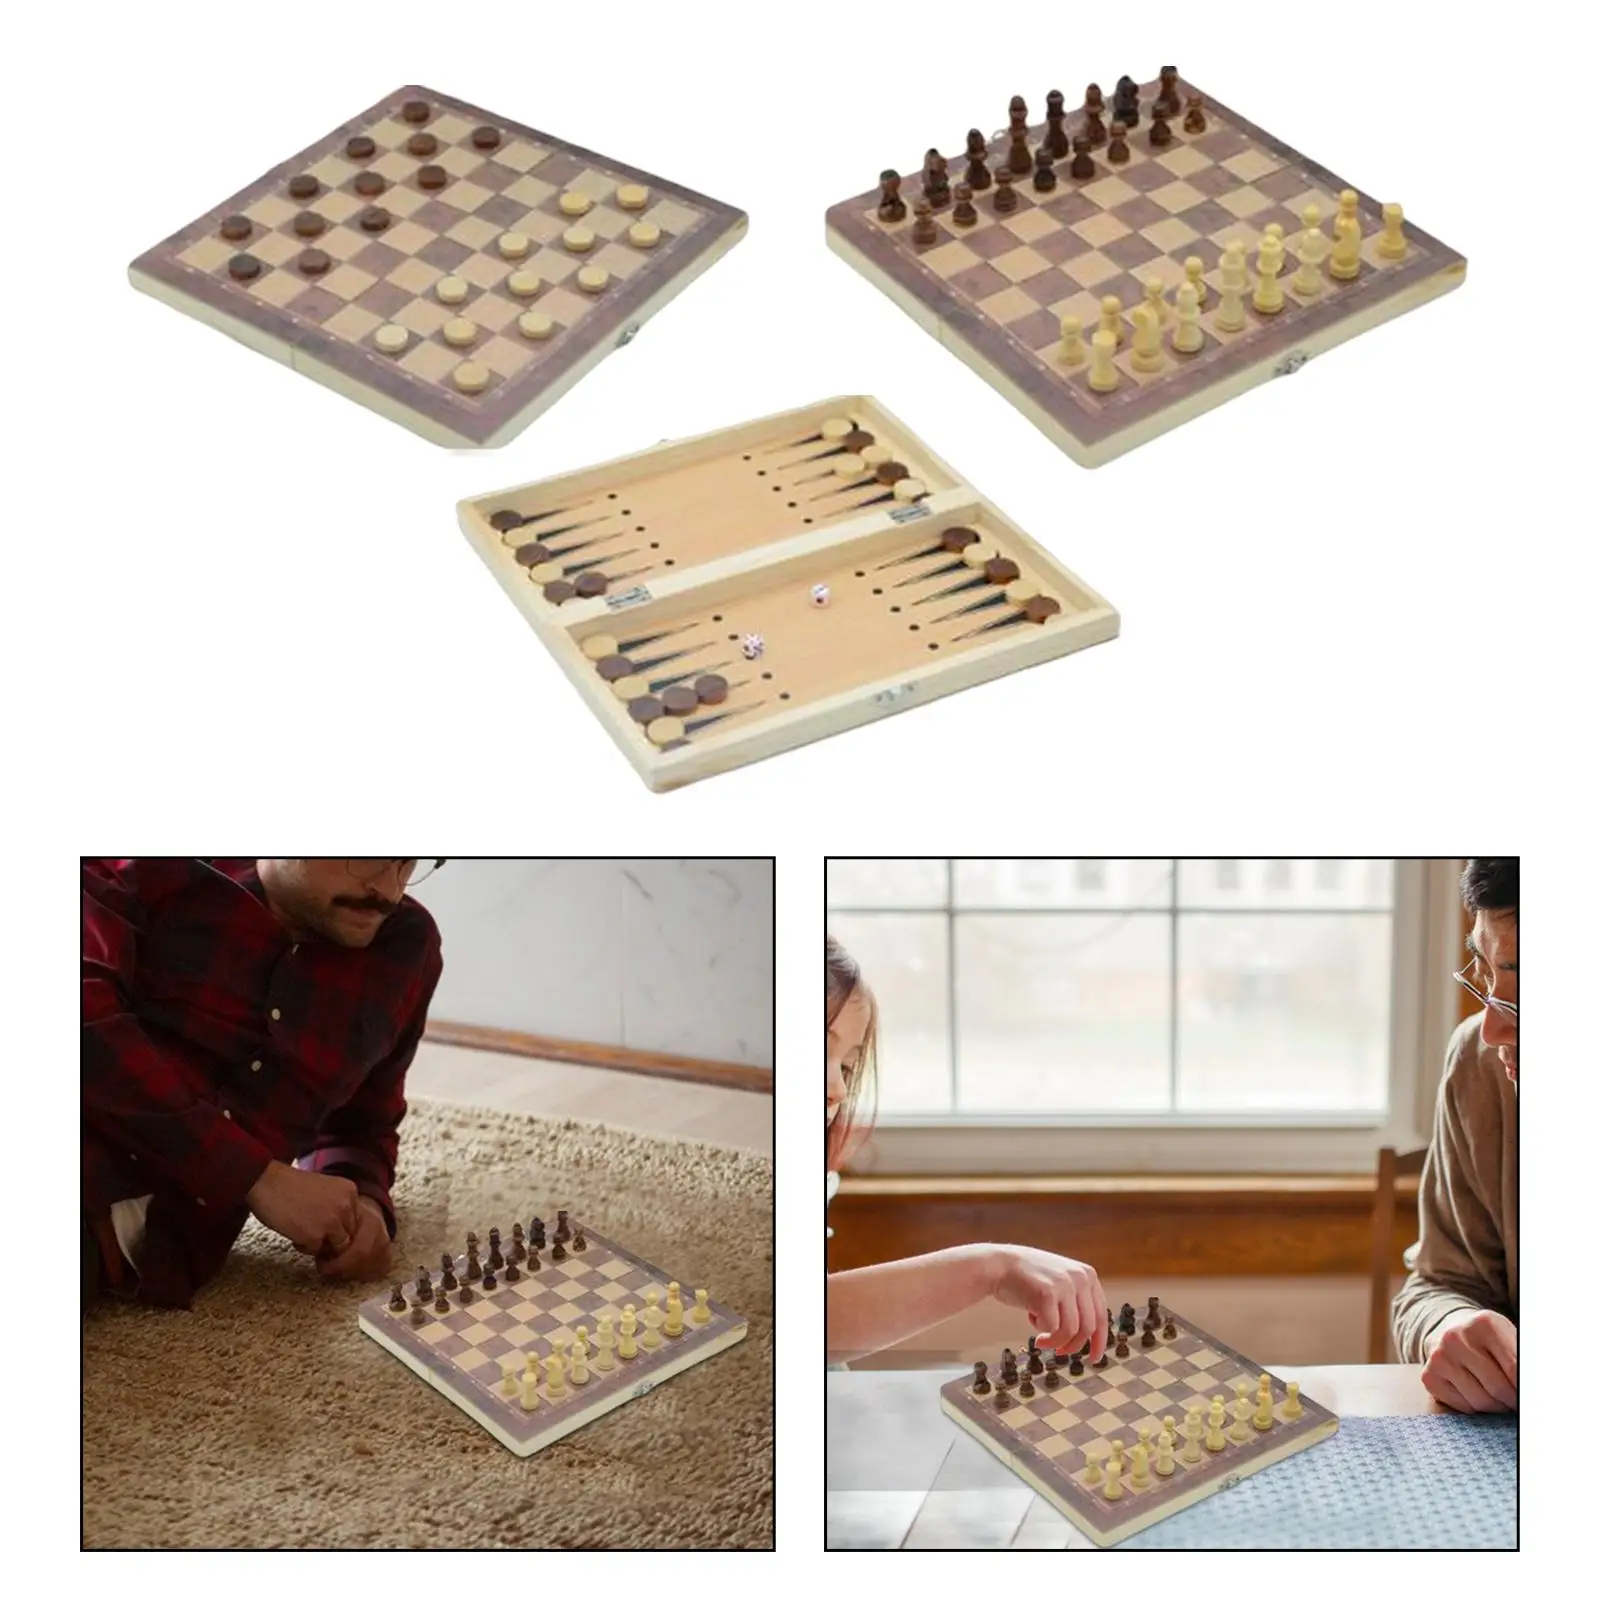 3 in 1 Wooden Chess Set Folding Storage, Portable Chess Checkers Backgammon Sets Board Games for Indoor